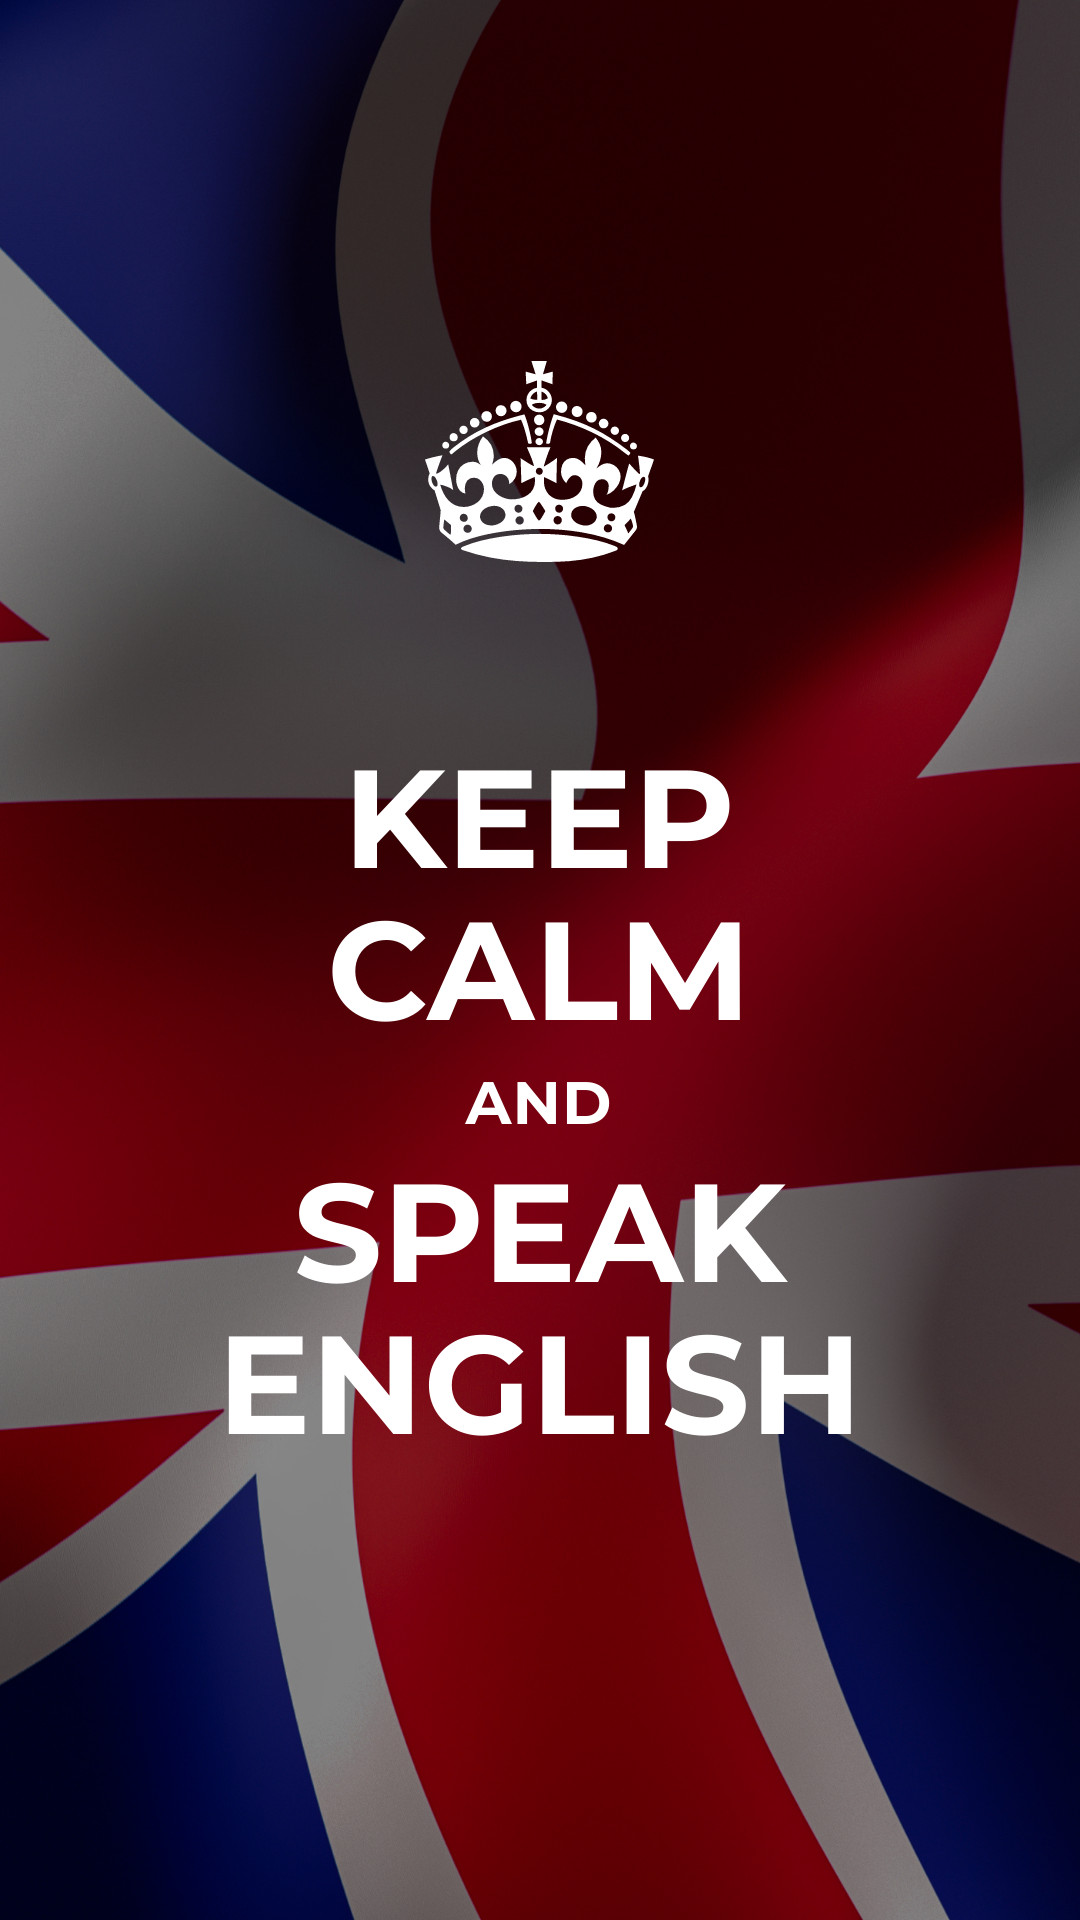 Keep Calm and Speak English Facebook Sponsored Message 1200x628